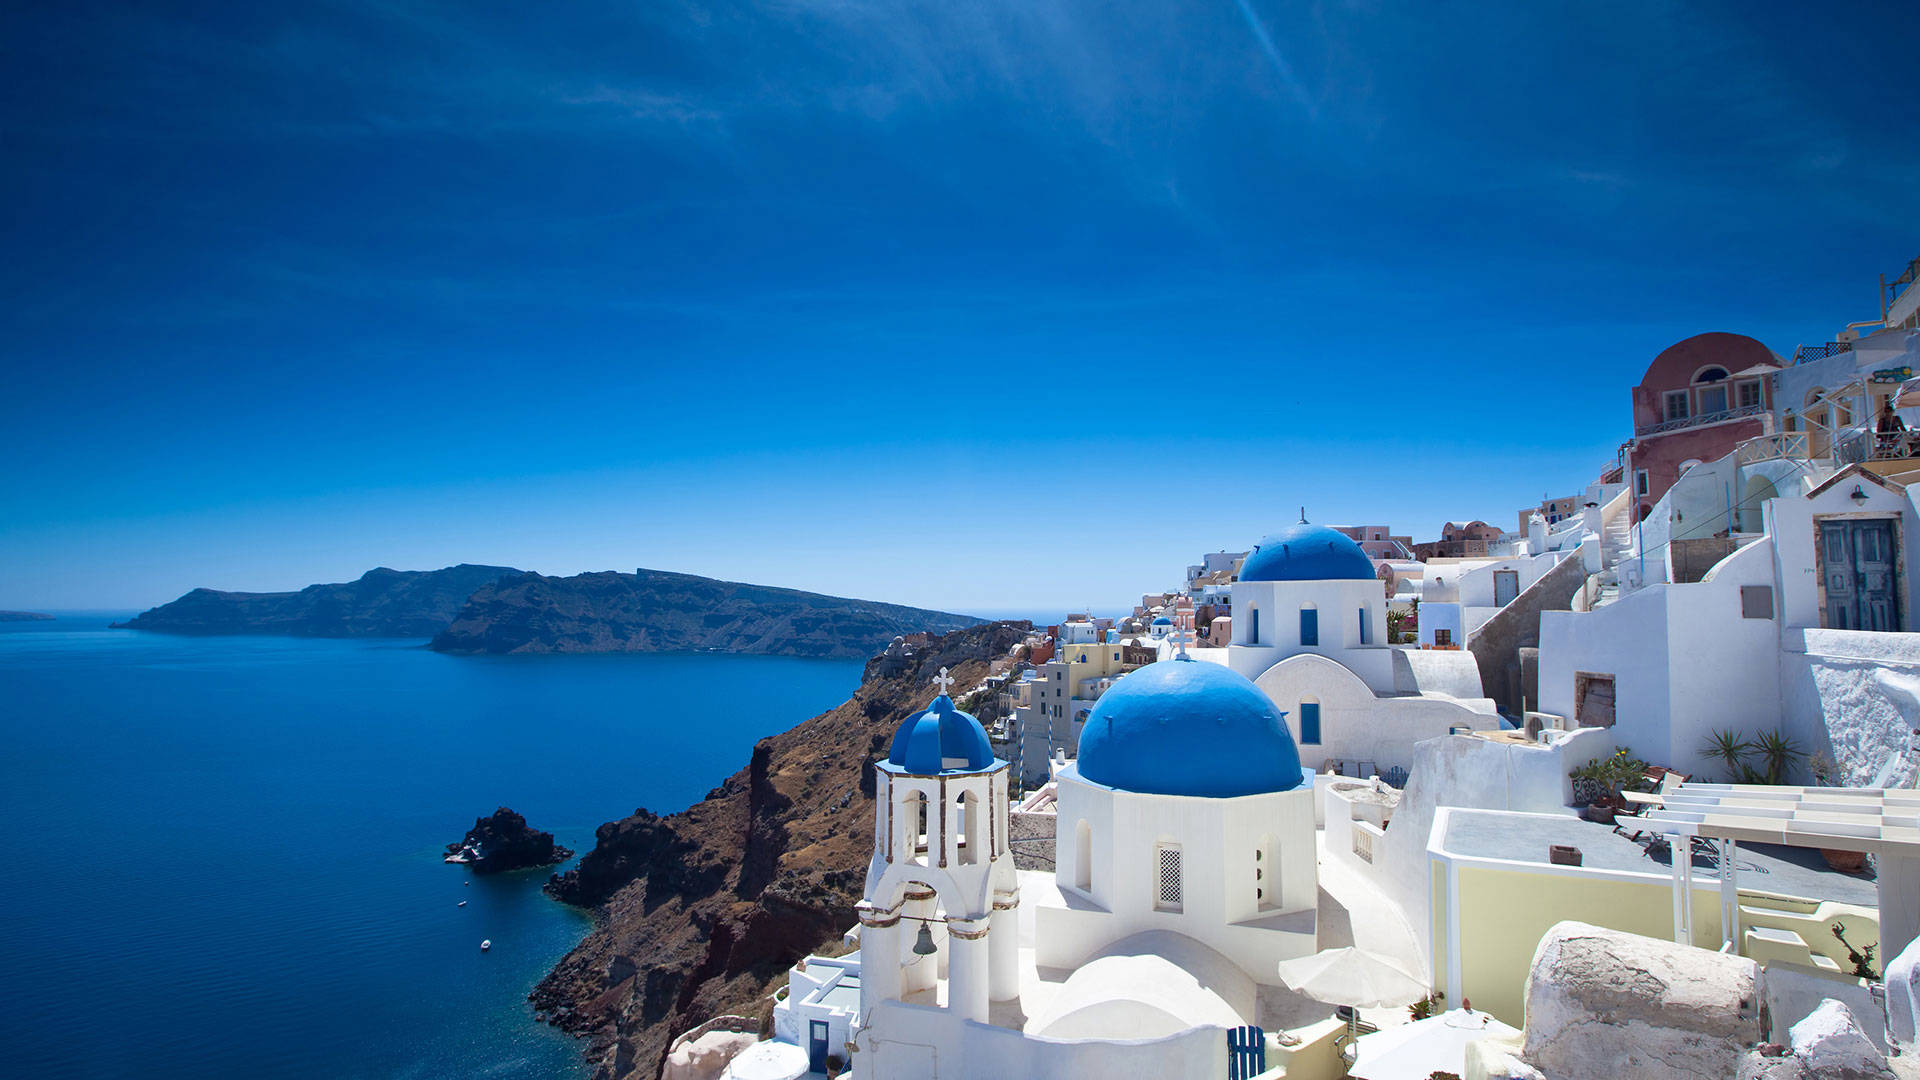 
Santorini's vista: The white houses of the villages stand tall above the craters, providing a striking contrast against the azure waters of the Aegean.